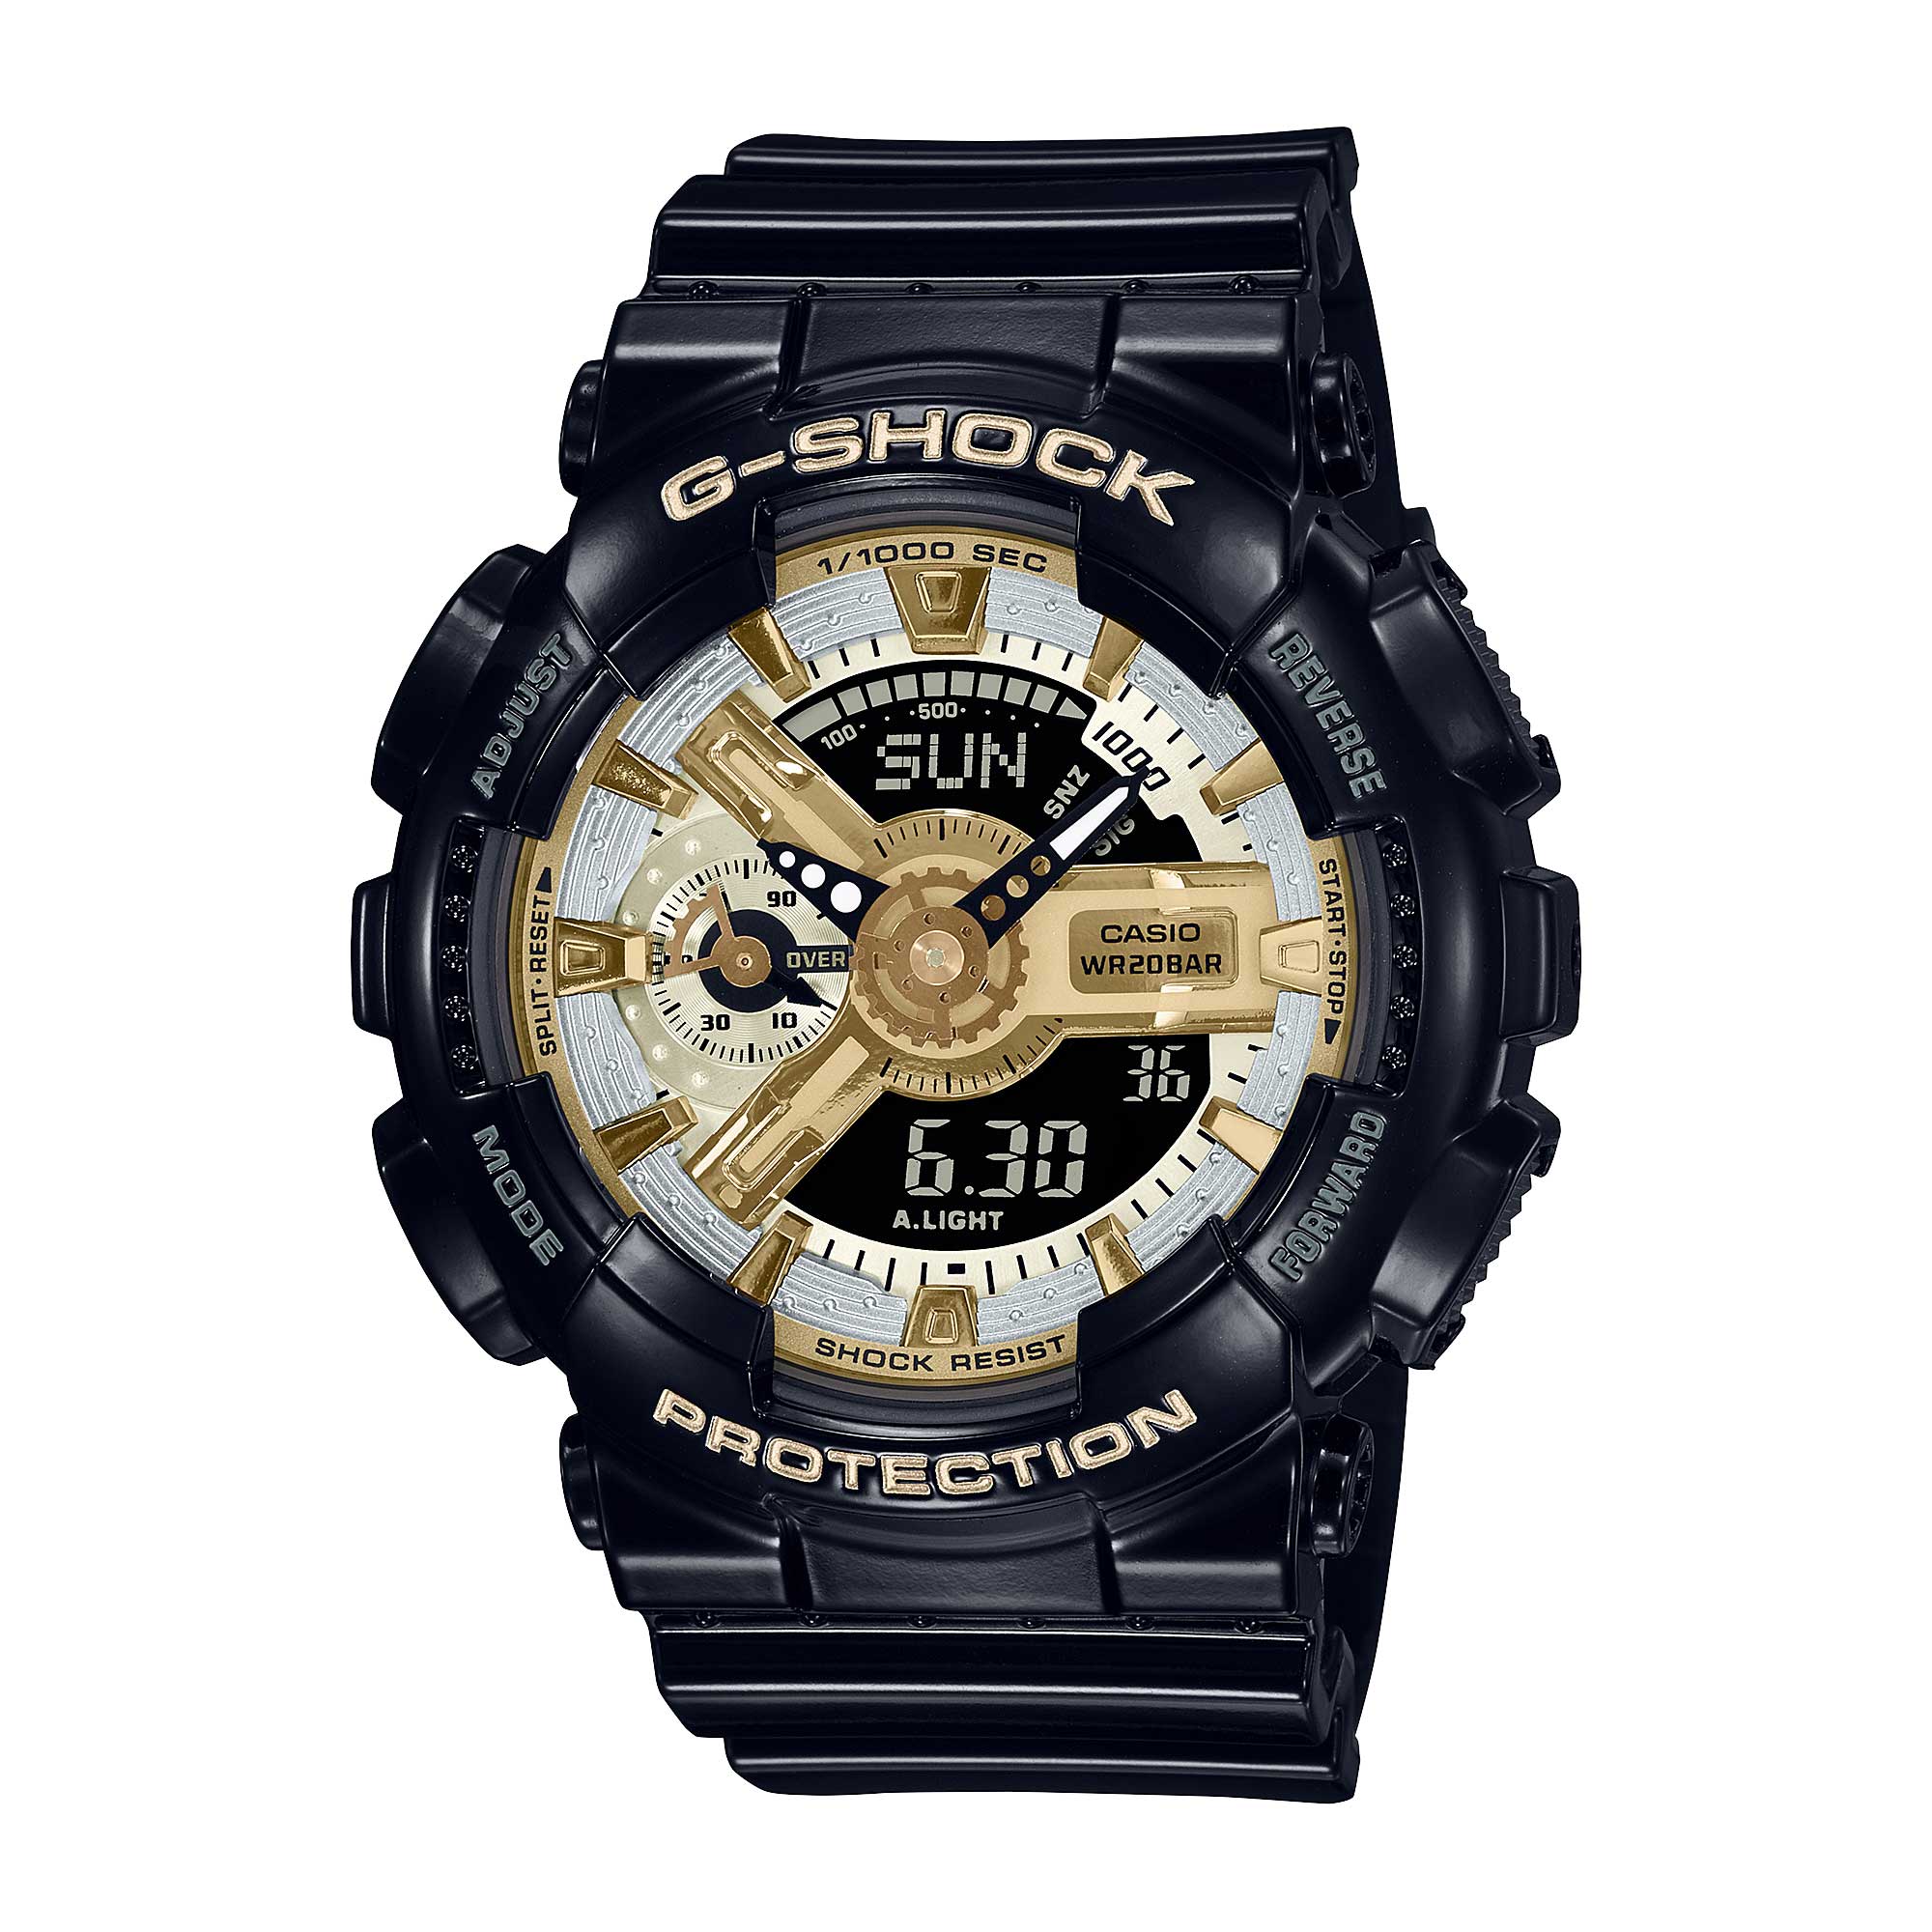 Casio G-Shock for Ladies' Black Resin Band Watch GMAS110GB-1A GMA-S110GB-1A Watchspree